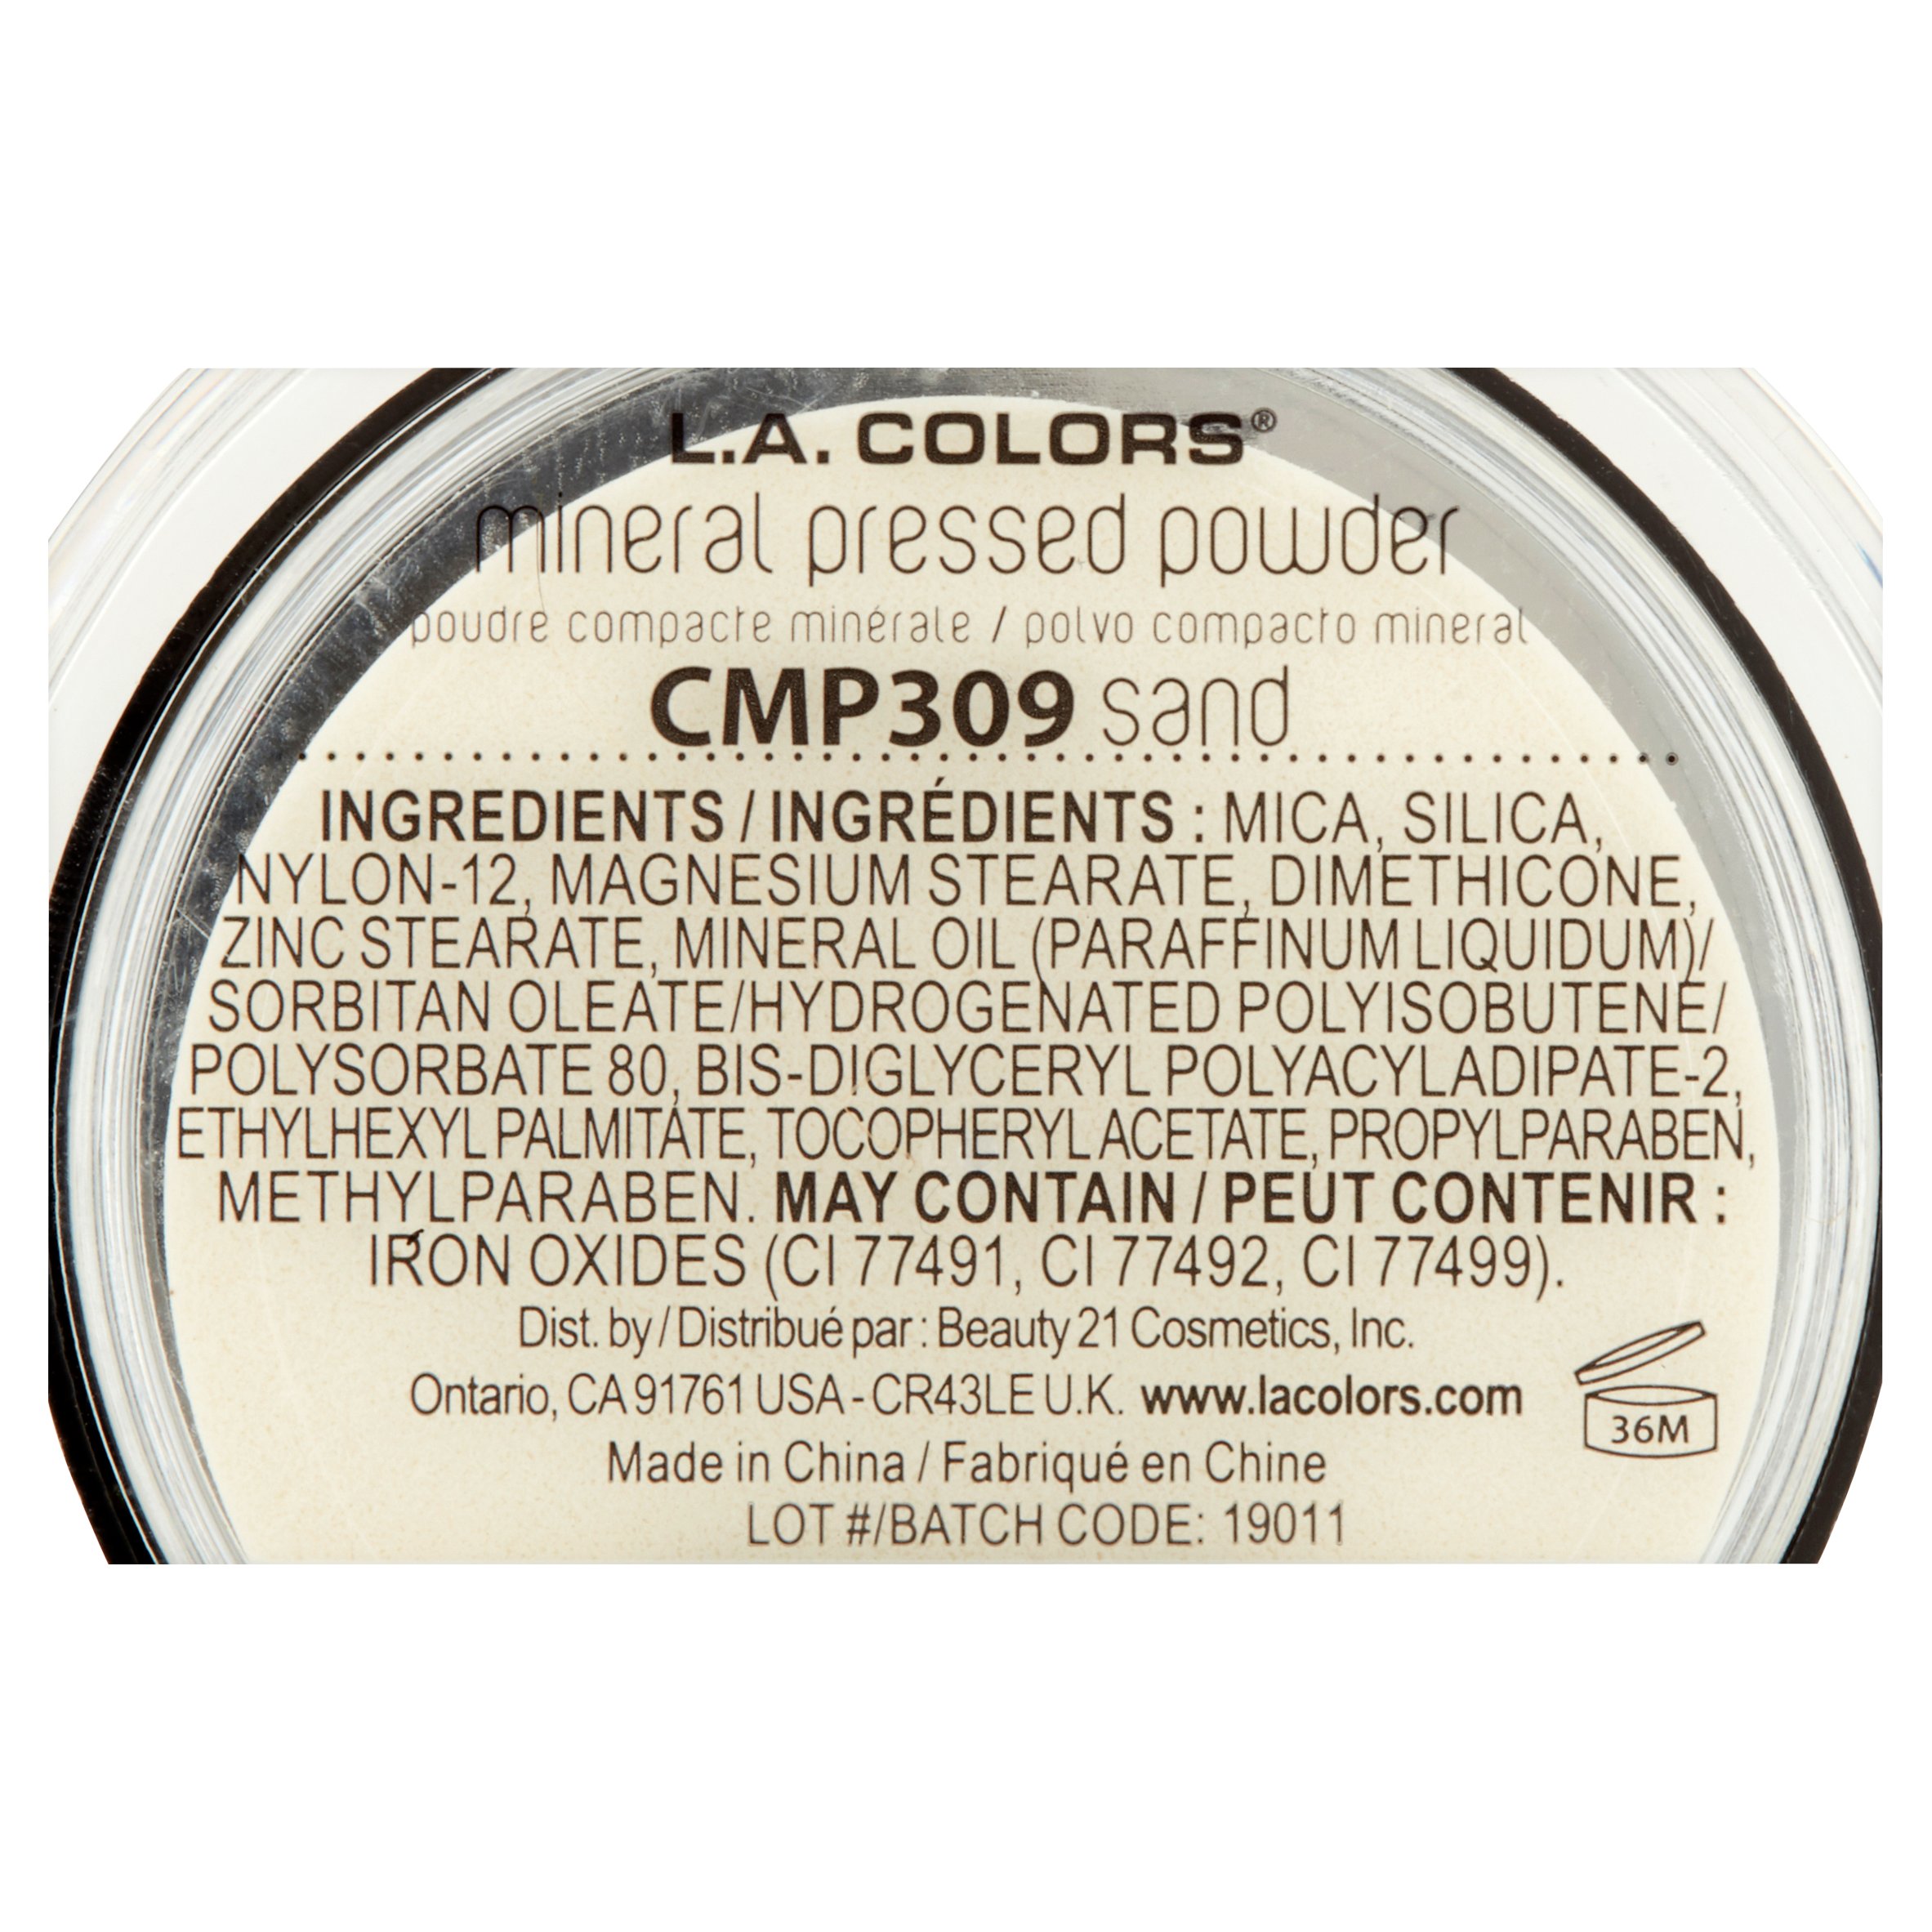 L.A. Colors Mineral Pressed Powder, Sand - image 4 of 4